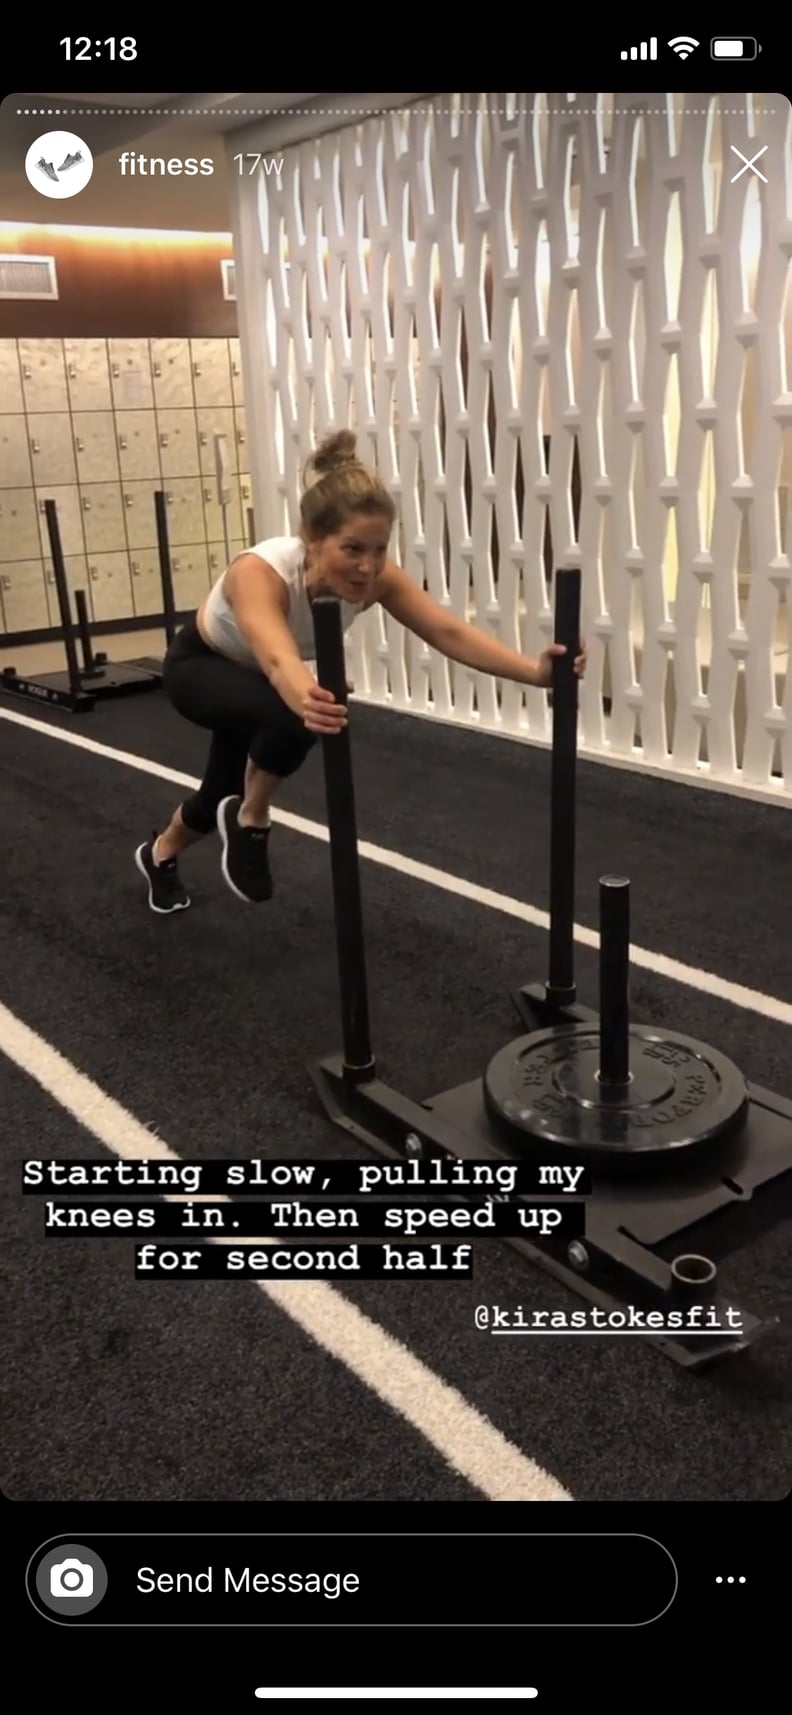 Sled Push With High Knee